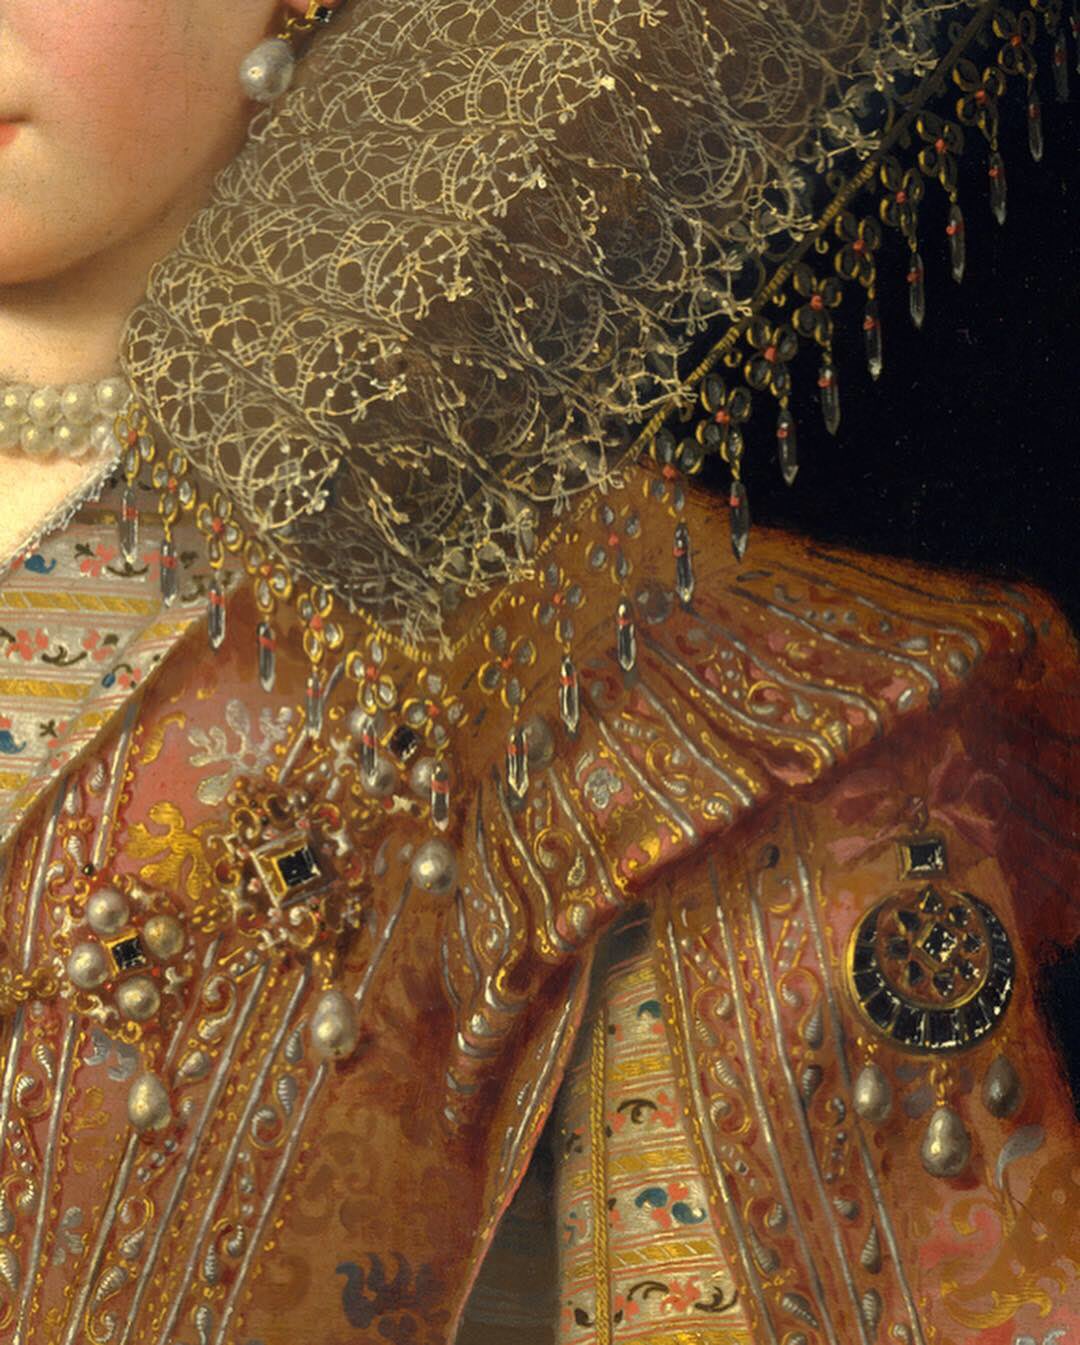 A lace collar is always impressive, but Margherita Gonzaga, Princess of Mantua, took it to the next level by trimming hers with charms. Portrait by Frans Pourbus the Younger, circa 1610.